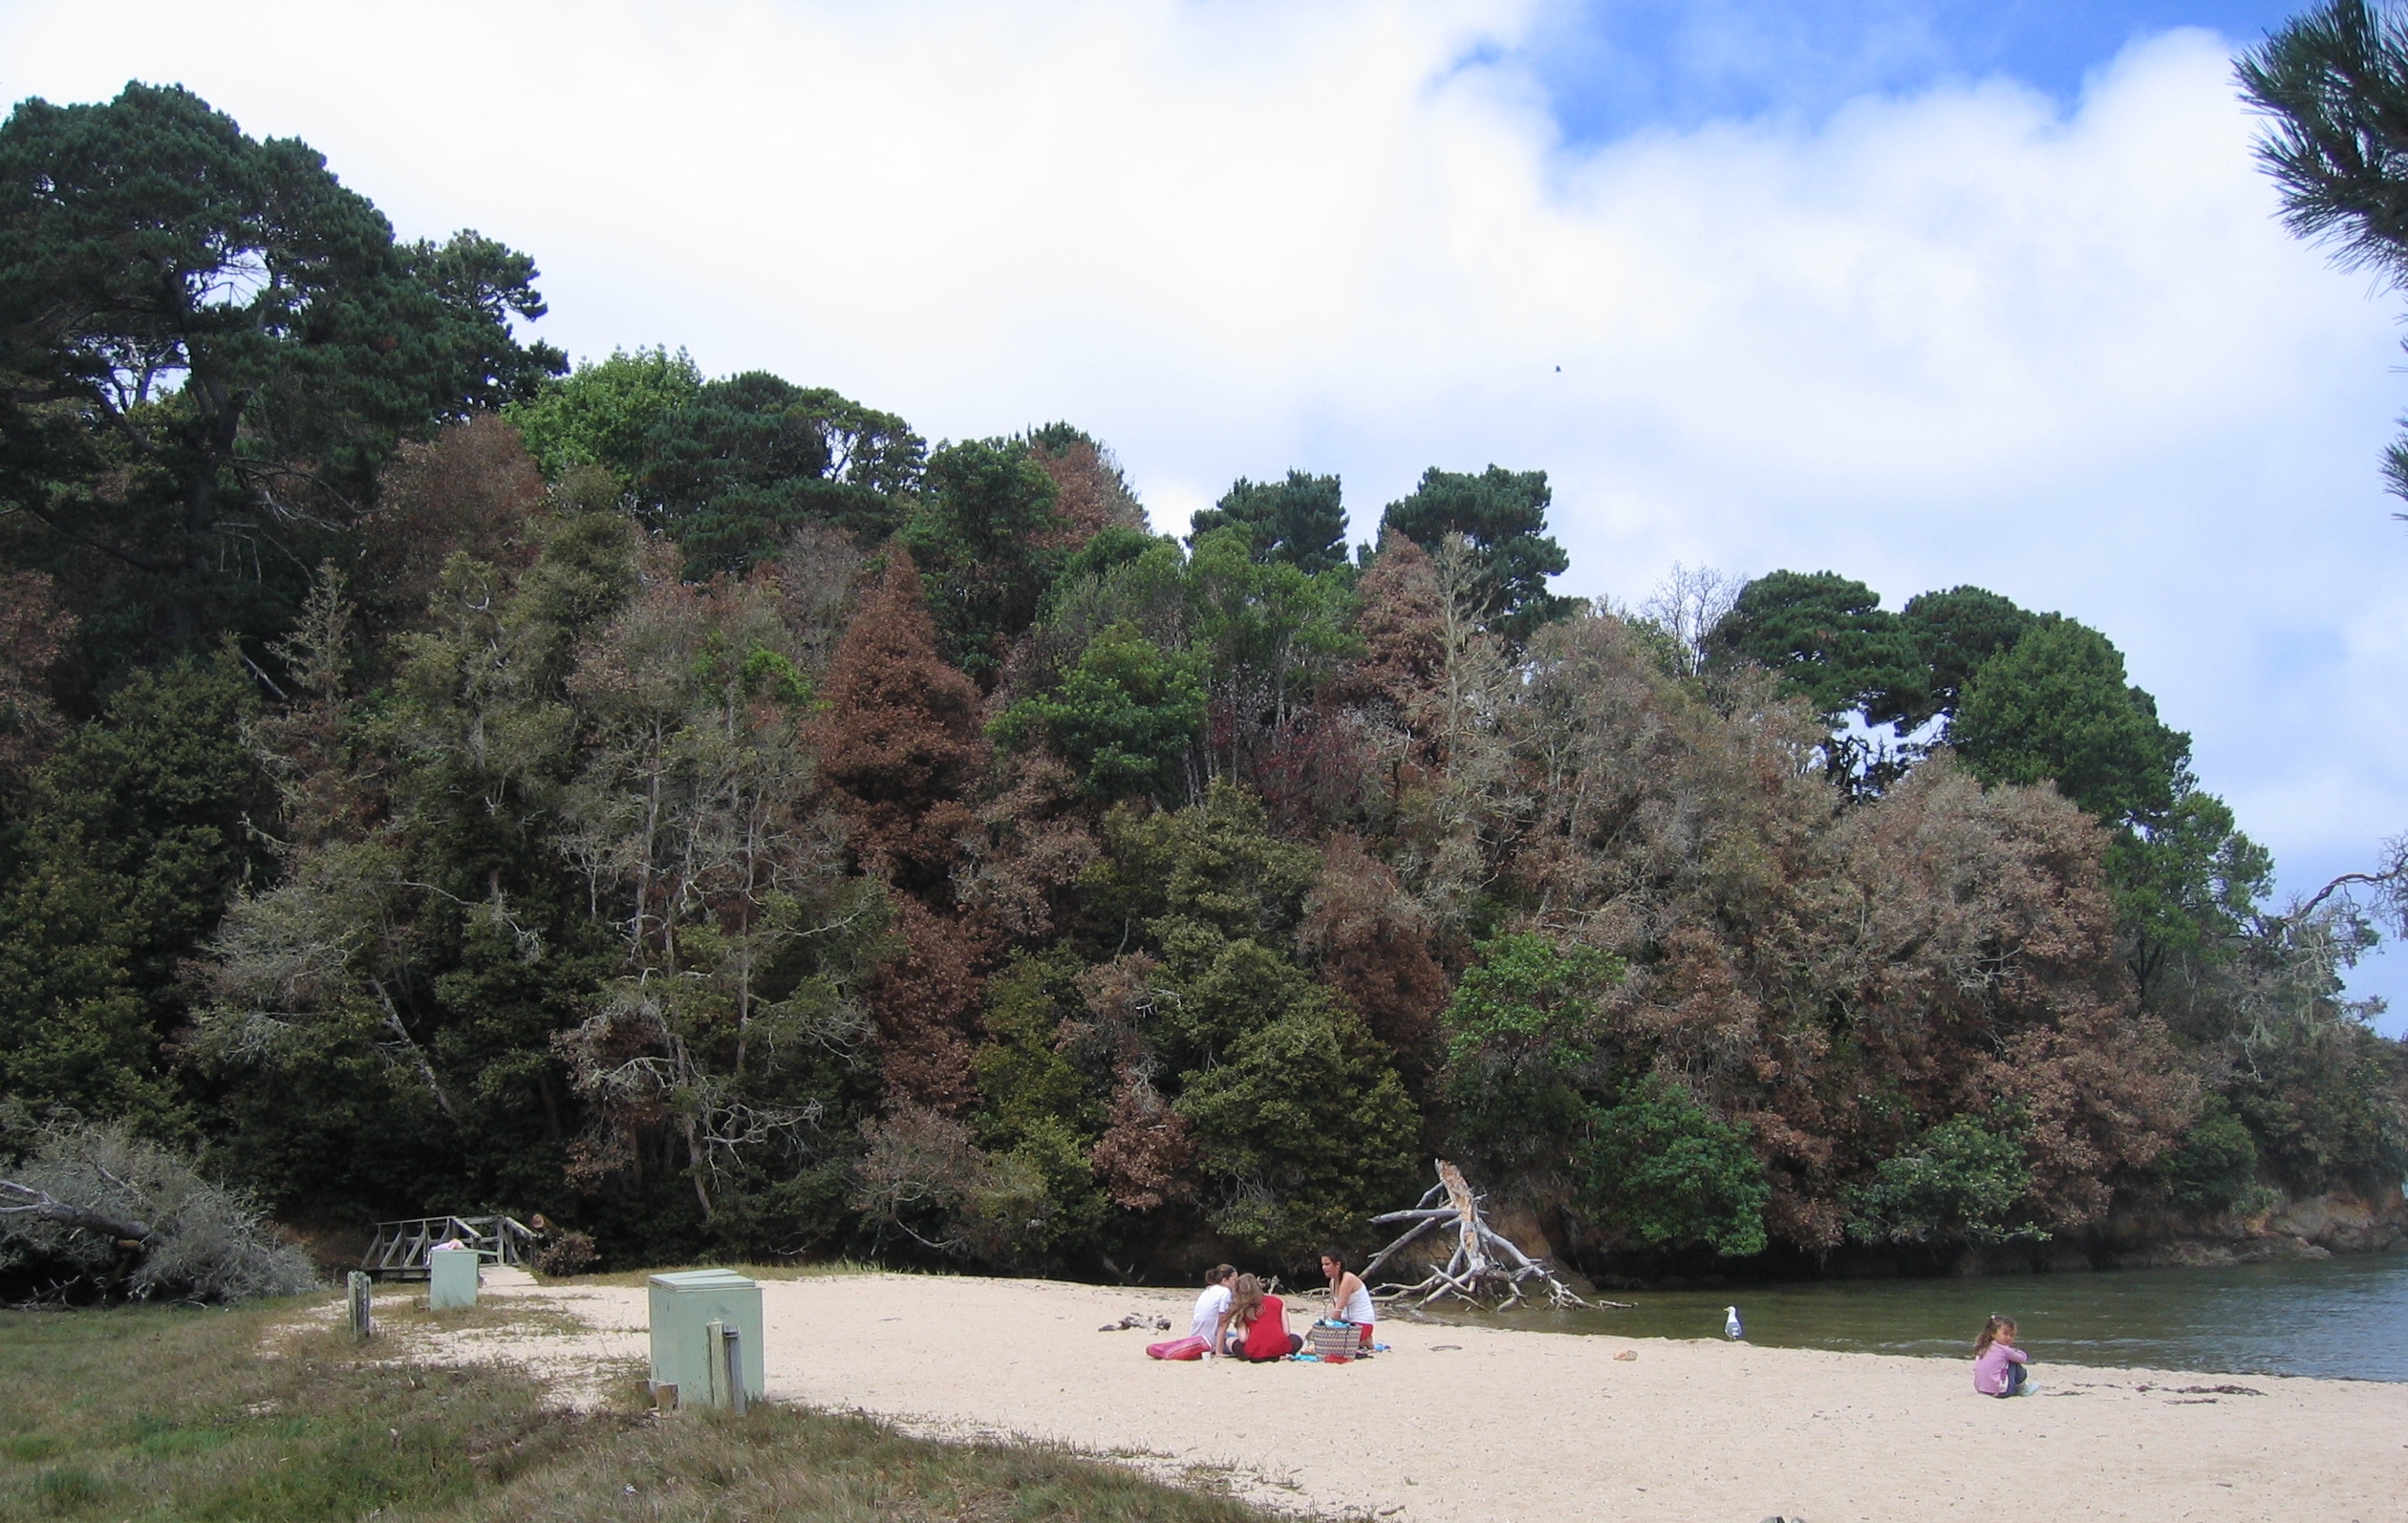 At Shelley Beach, a few miles North of San Francisco, tanoaks and oaks, the most sacred trees to native people of the Northern California coast, have been decimated due to the exotic disease known as Sudden Oak Death (SOD). SOD is thus not only changing the landscape dynamics but also profoundly altering the local culture. (Photo by Matteo Garbelotto)